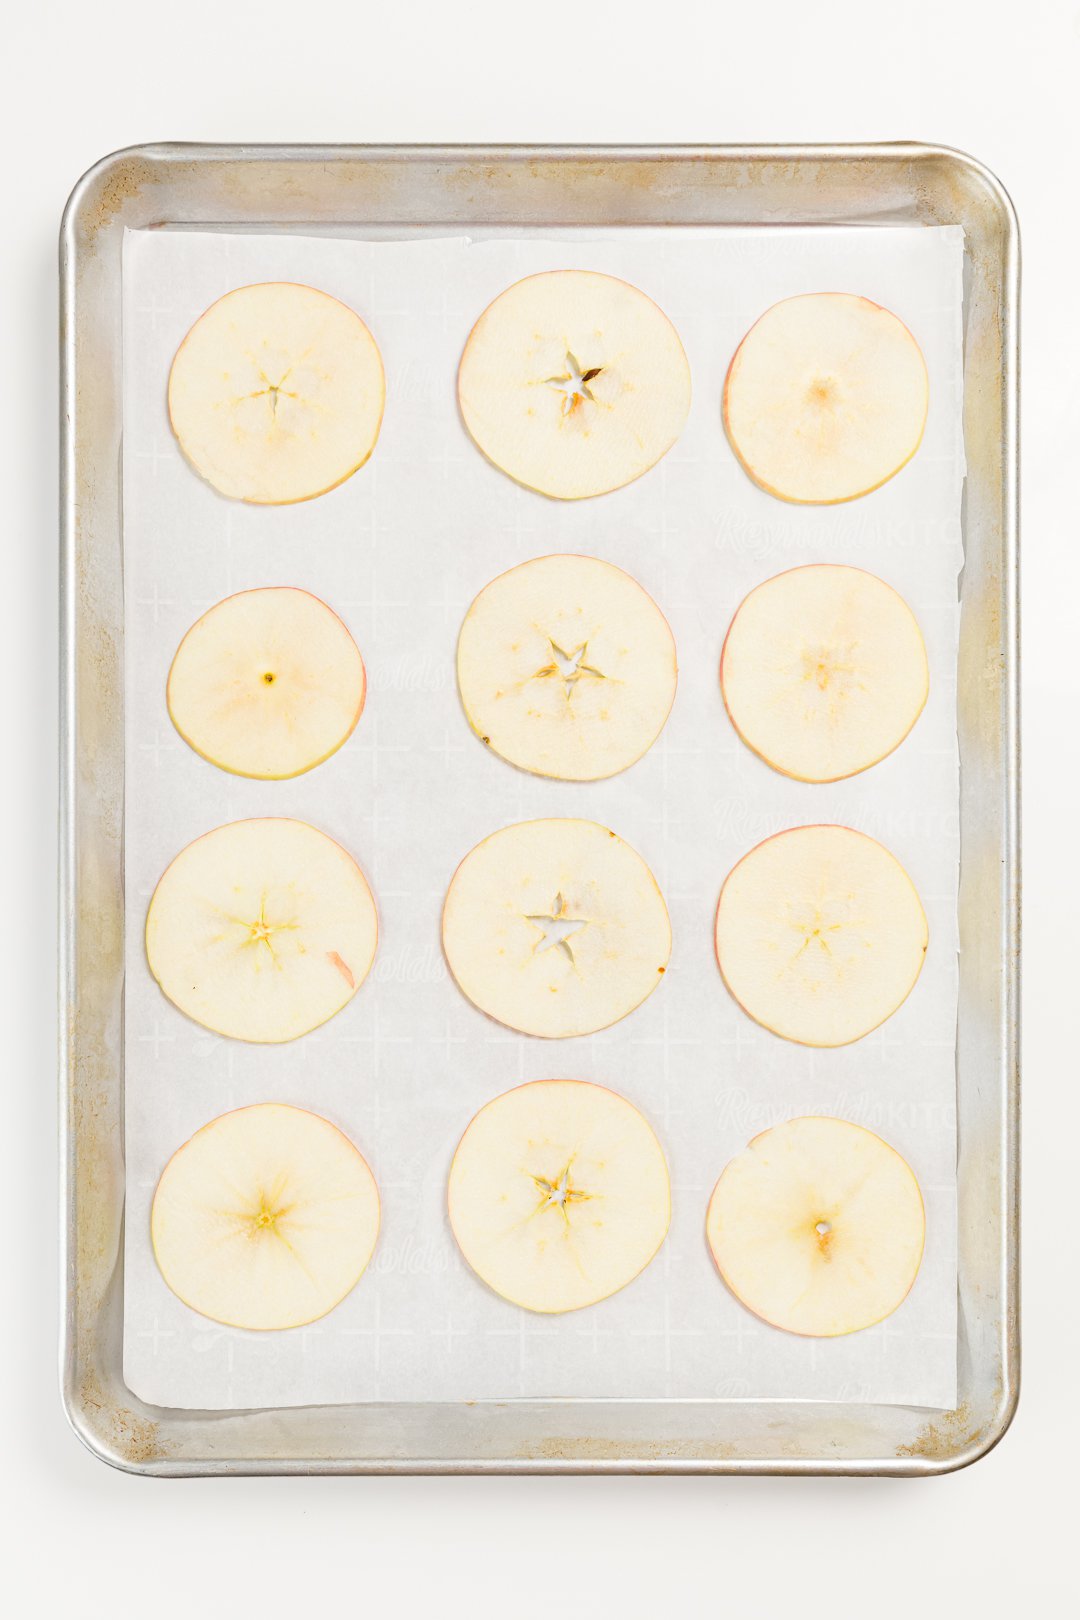 Sliced apples on parchment